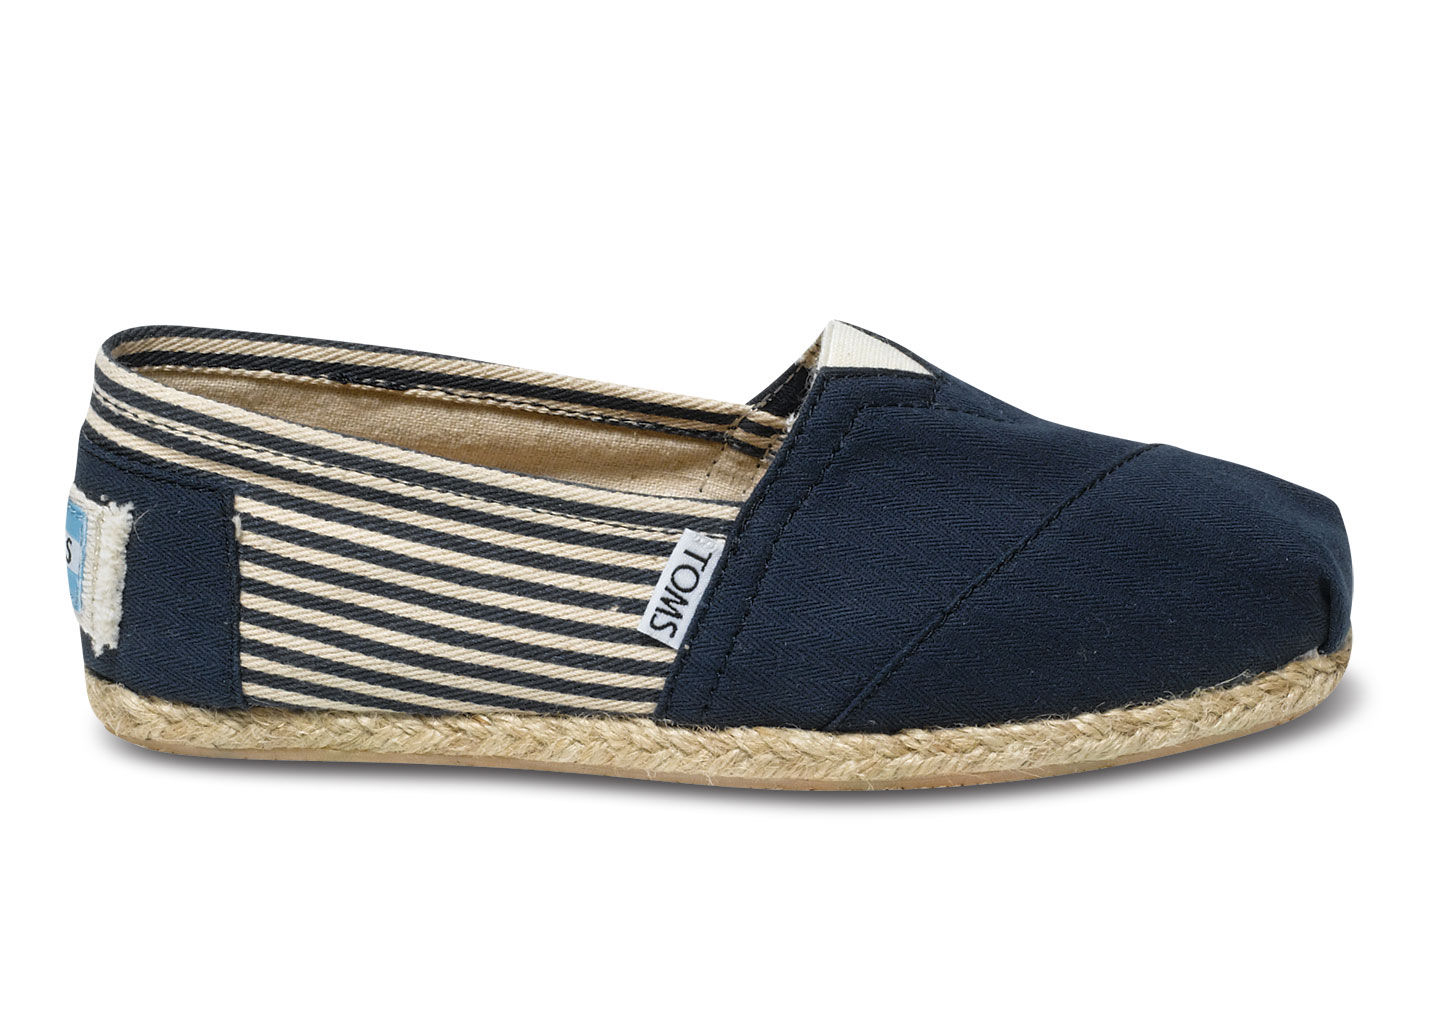 Lyst - Toms University Navy Rope Sole Women'S Classics in Blue